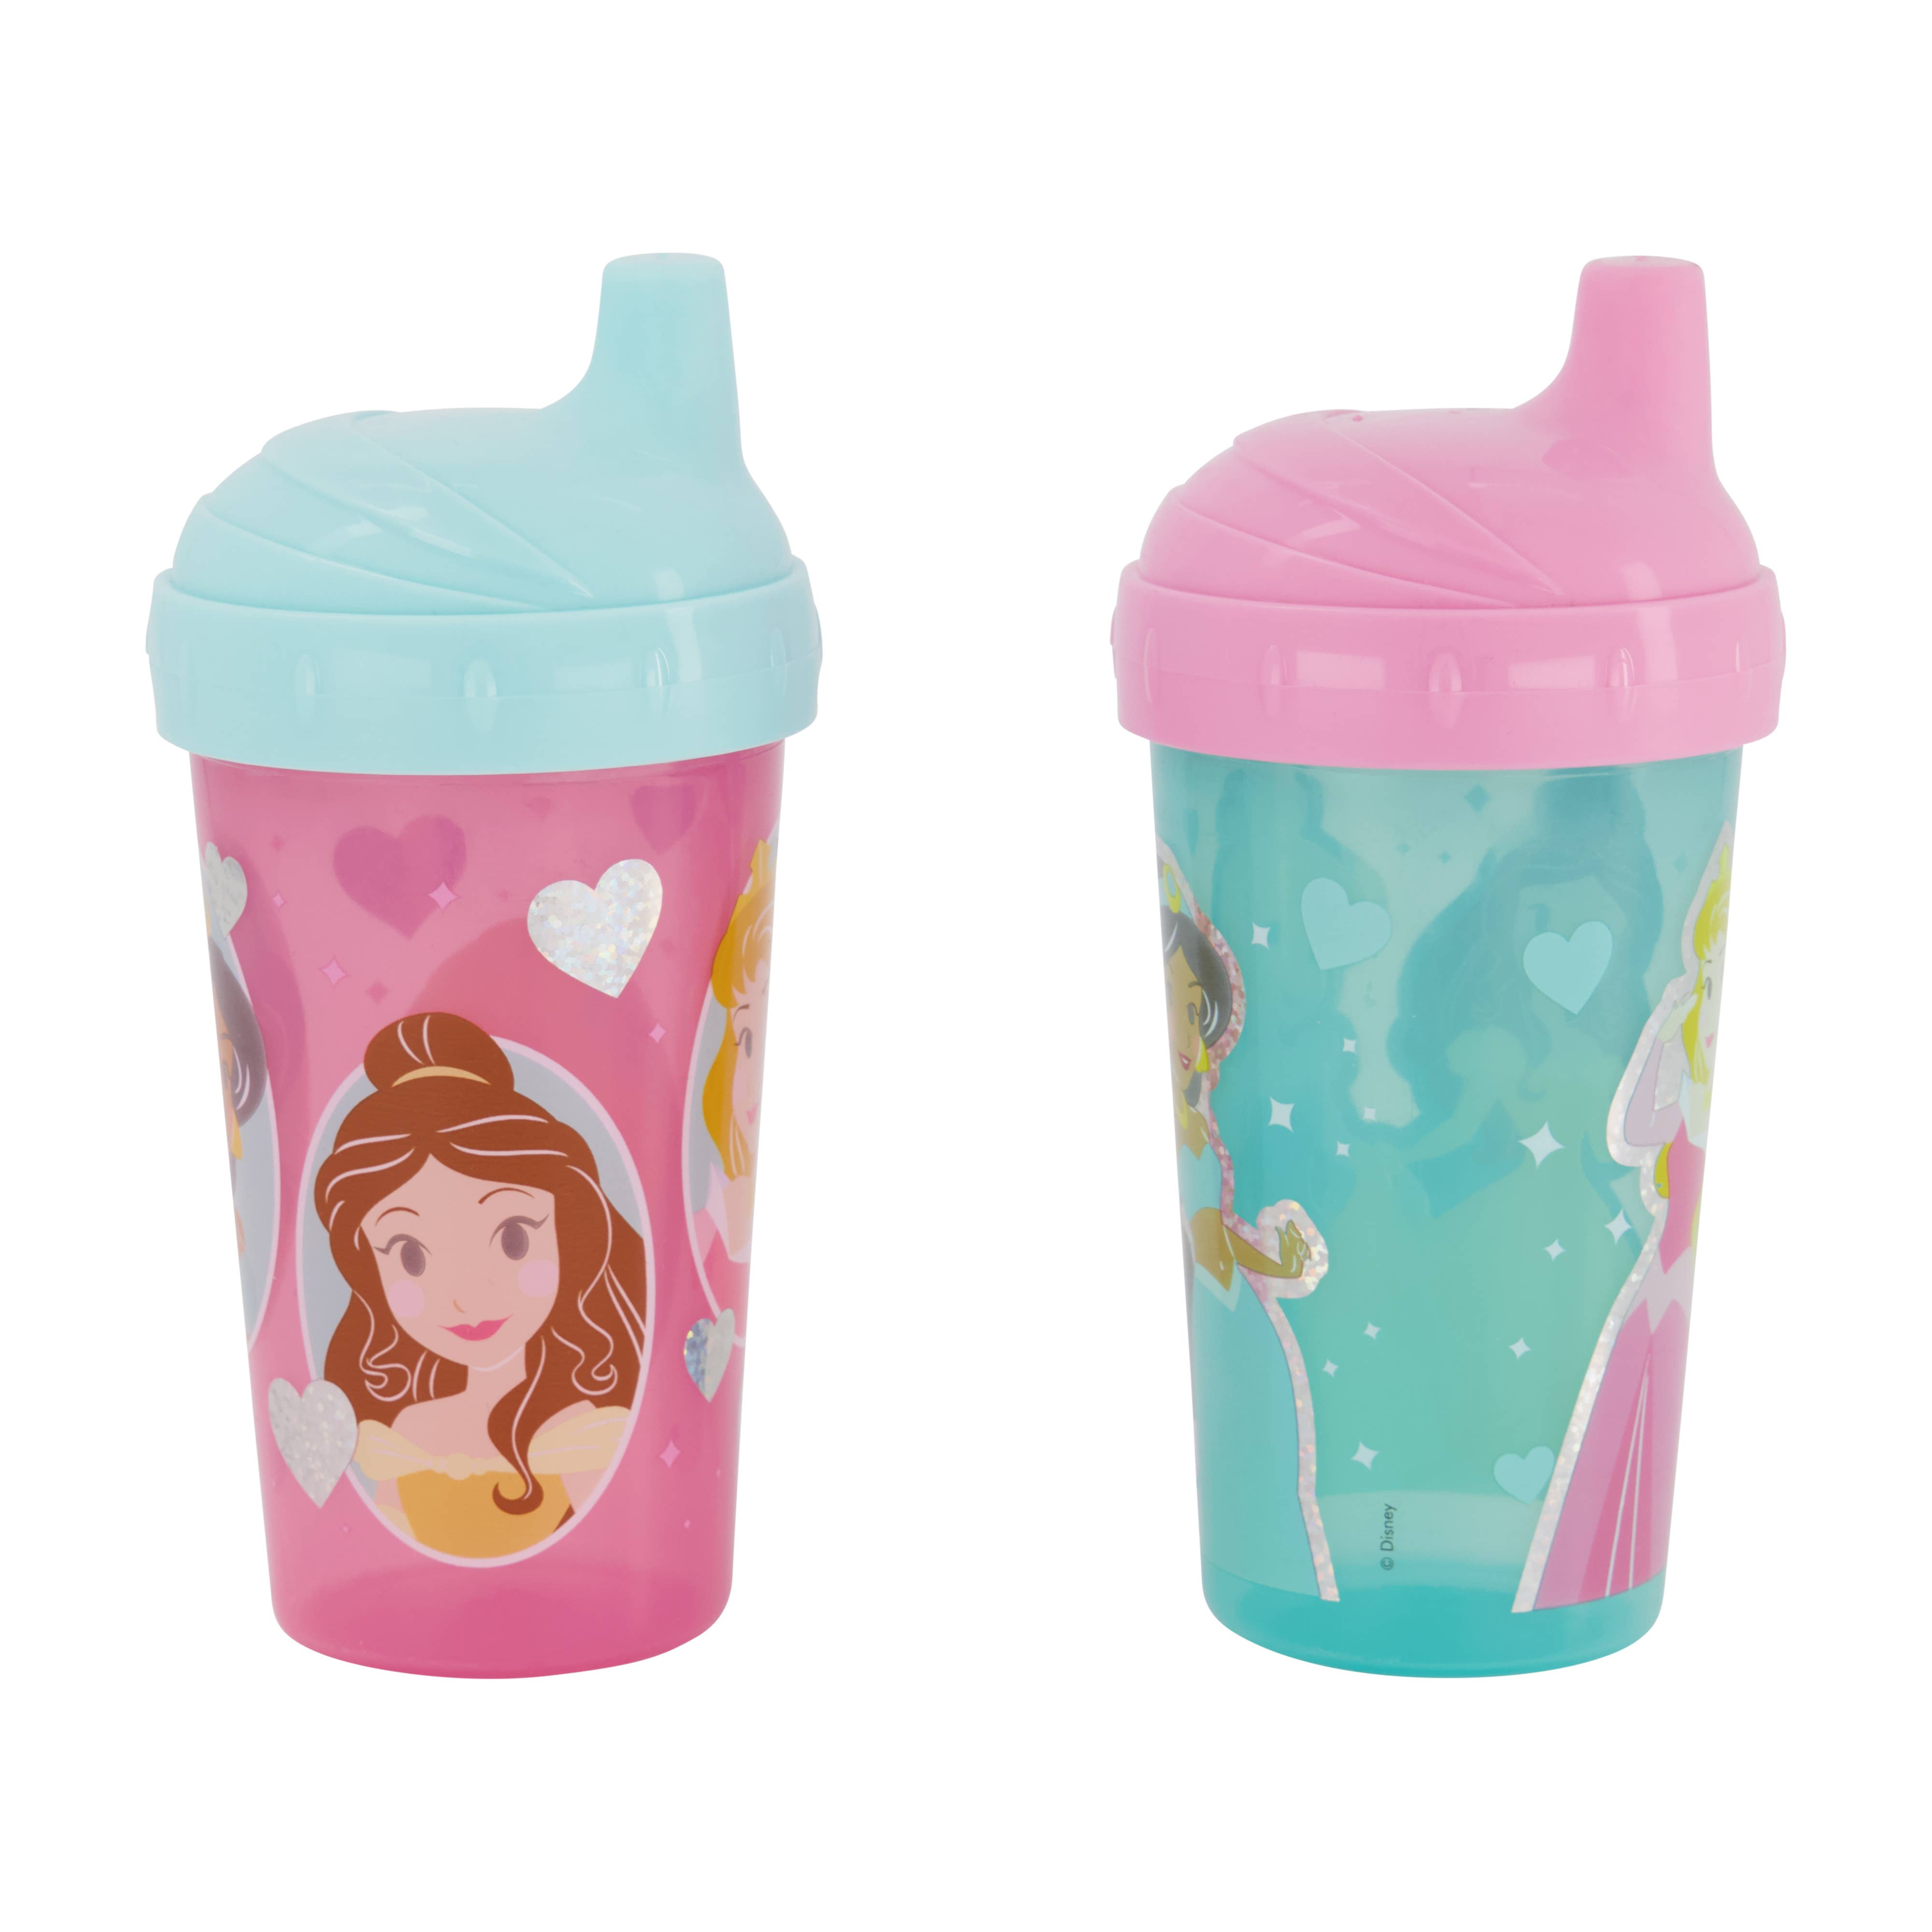 Light Grey Silicone drinking training sippy cup kids Toddler MKS Miminoo USA